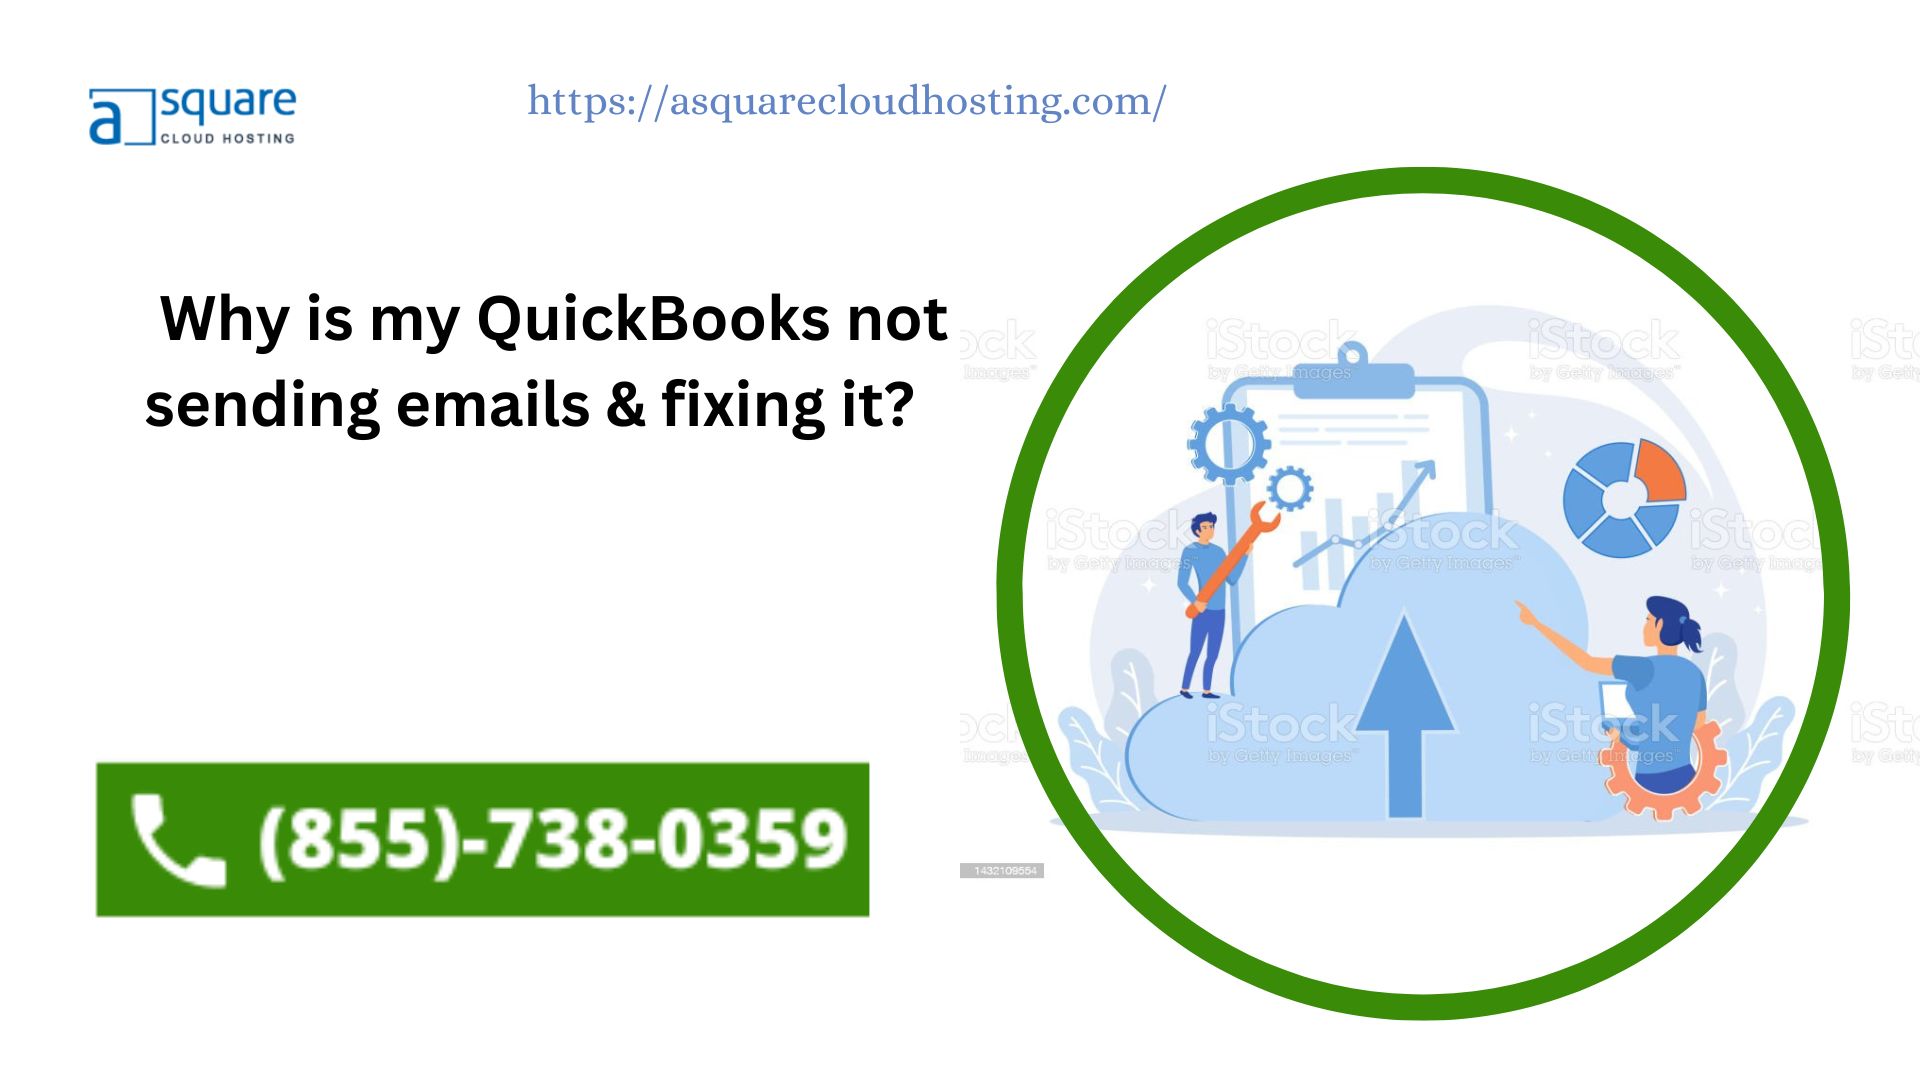 Why is my QuickBooks not sending emails & fixing it?